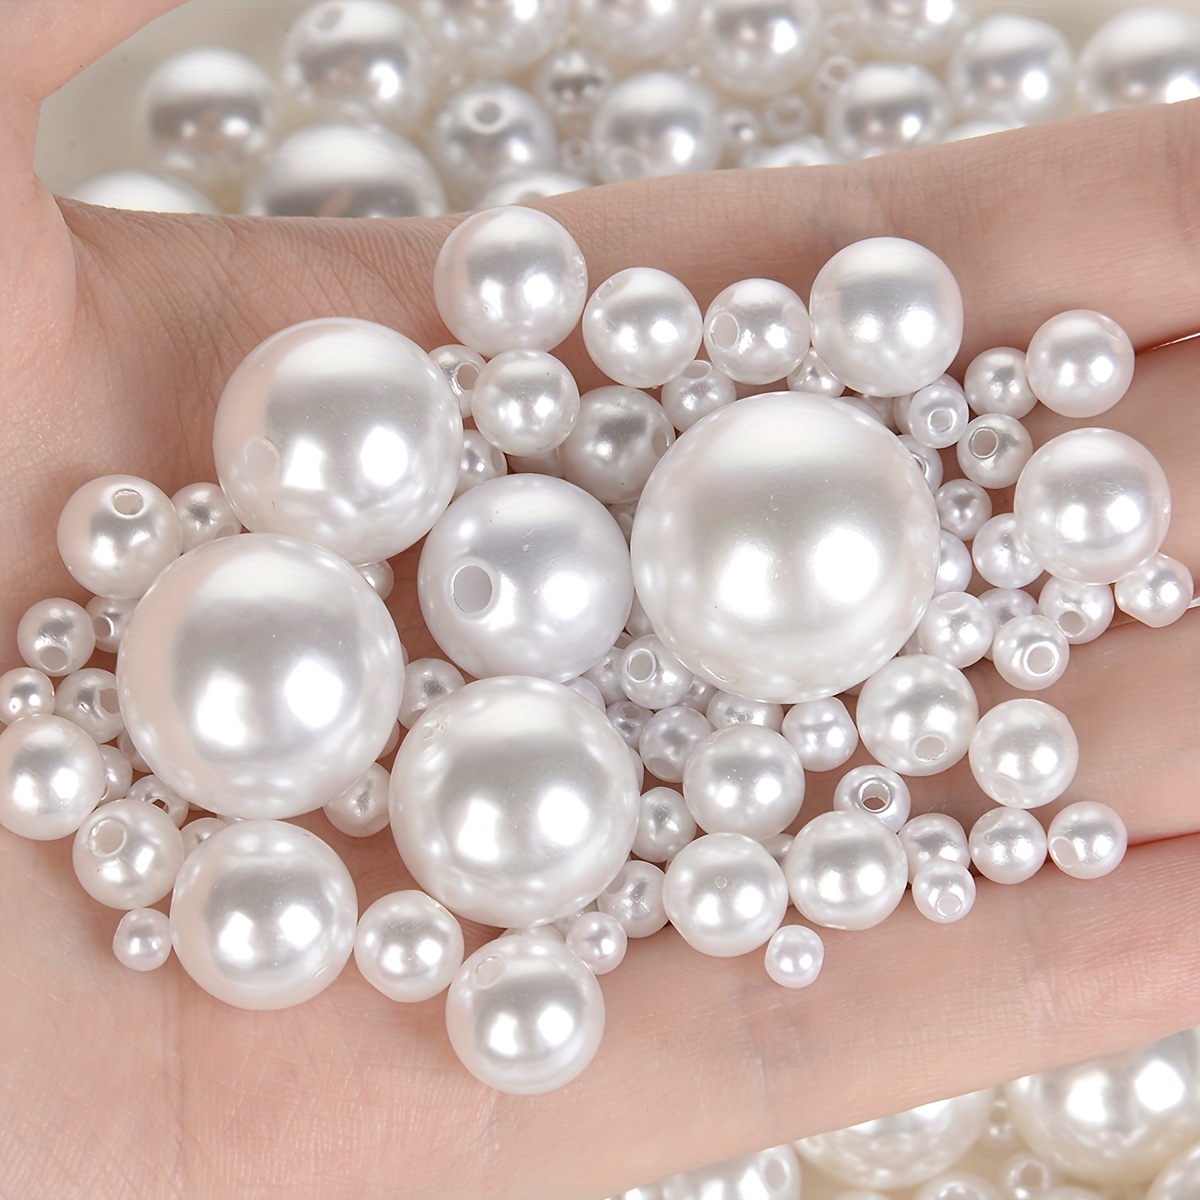 Craft Pearl Beads - 30mm - White Colored - Sophisticated Look - Premium  Construction - Versatile Use - Pearl Beads for Jewellery & Décor